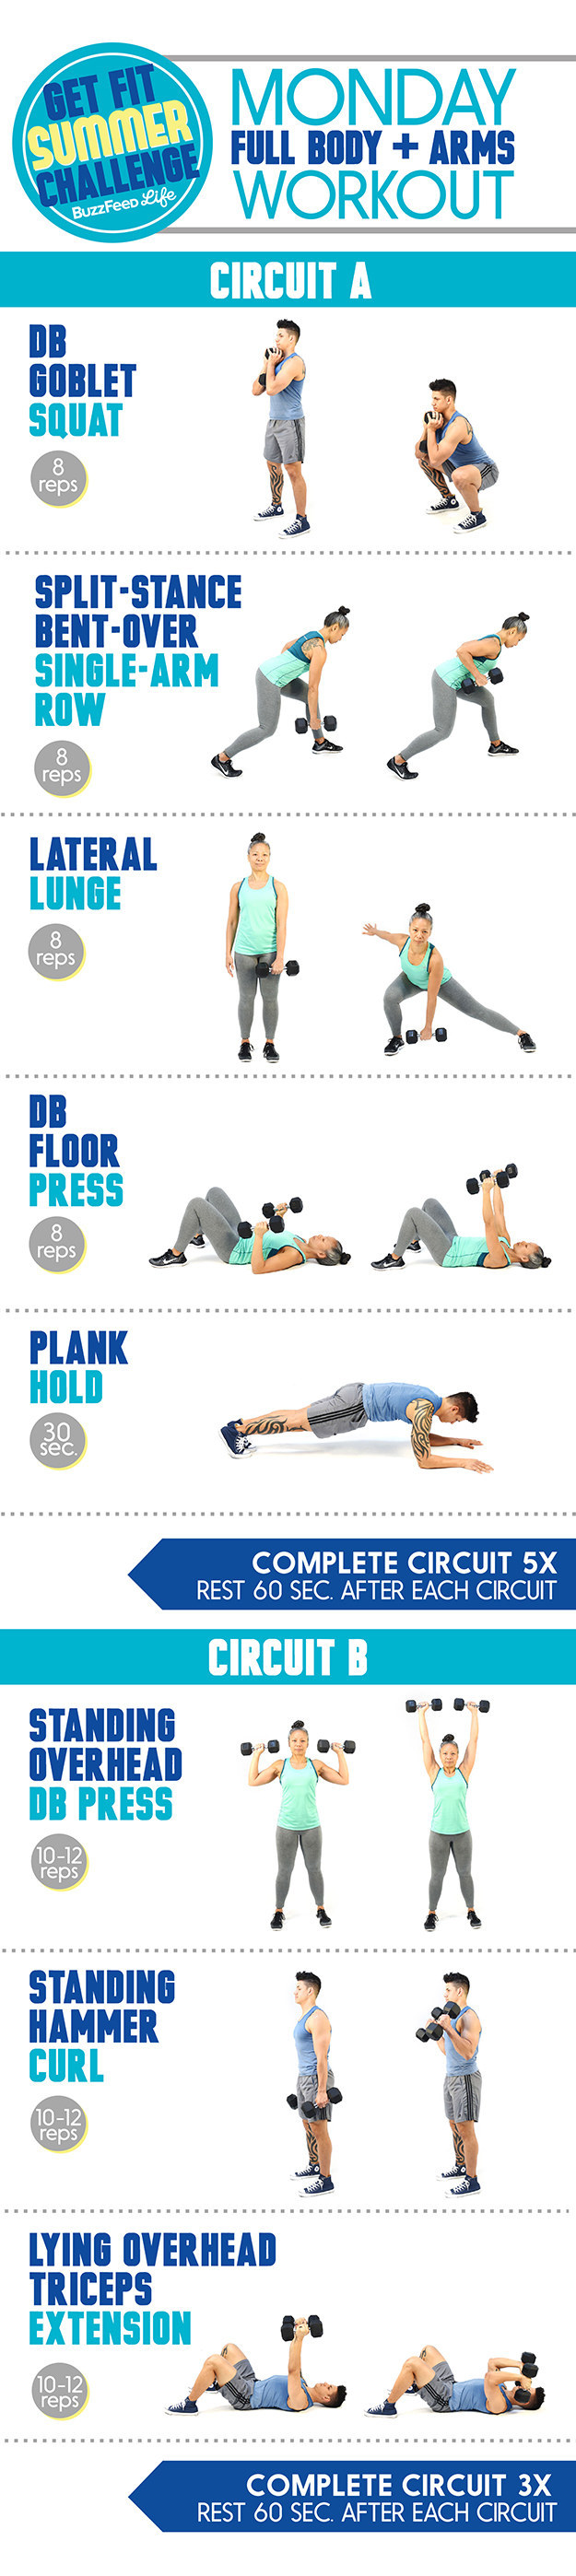 This is the workout you'll do every Monday: